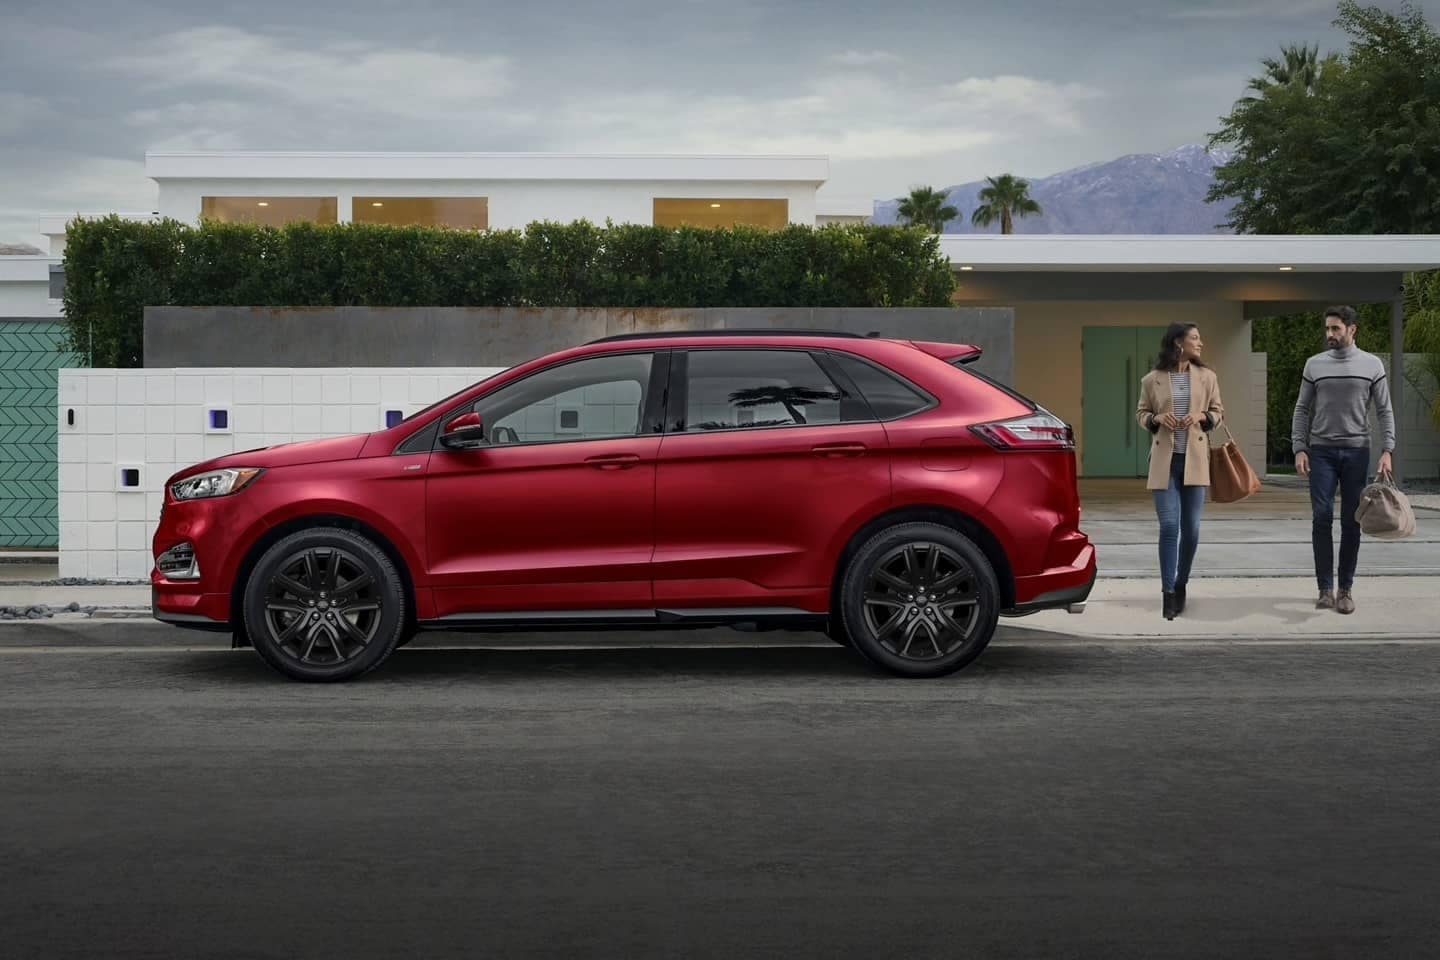 Used Ford Edge ST in Rapid Red near a modern-style house with two people walking toward the SUV.